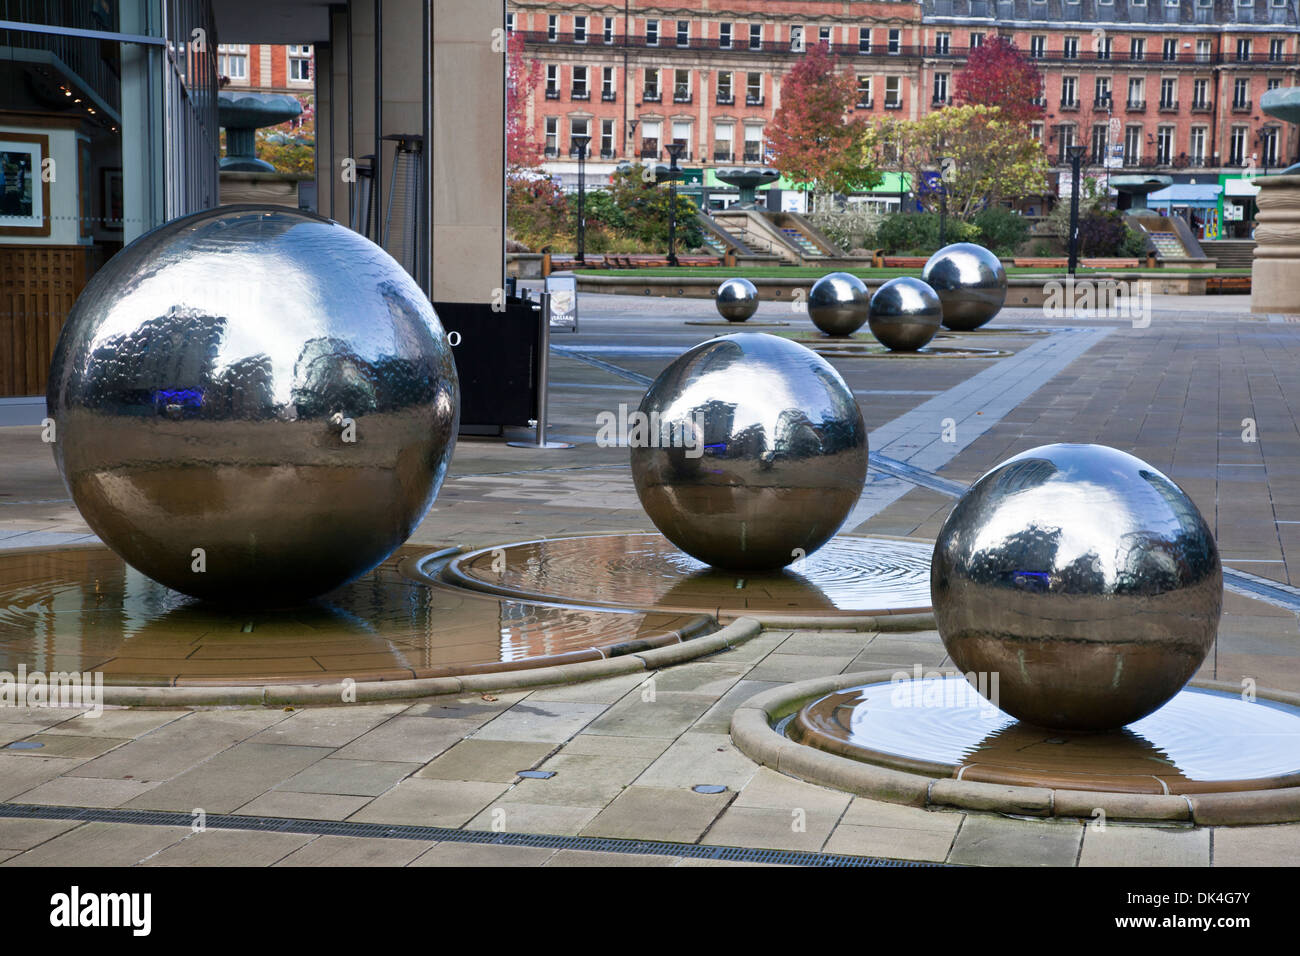 Silver ball water features, part of the urban design within the center of the City of Sheffield, South Yorkshire, England Stock Photo